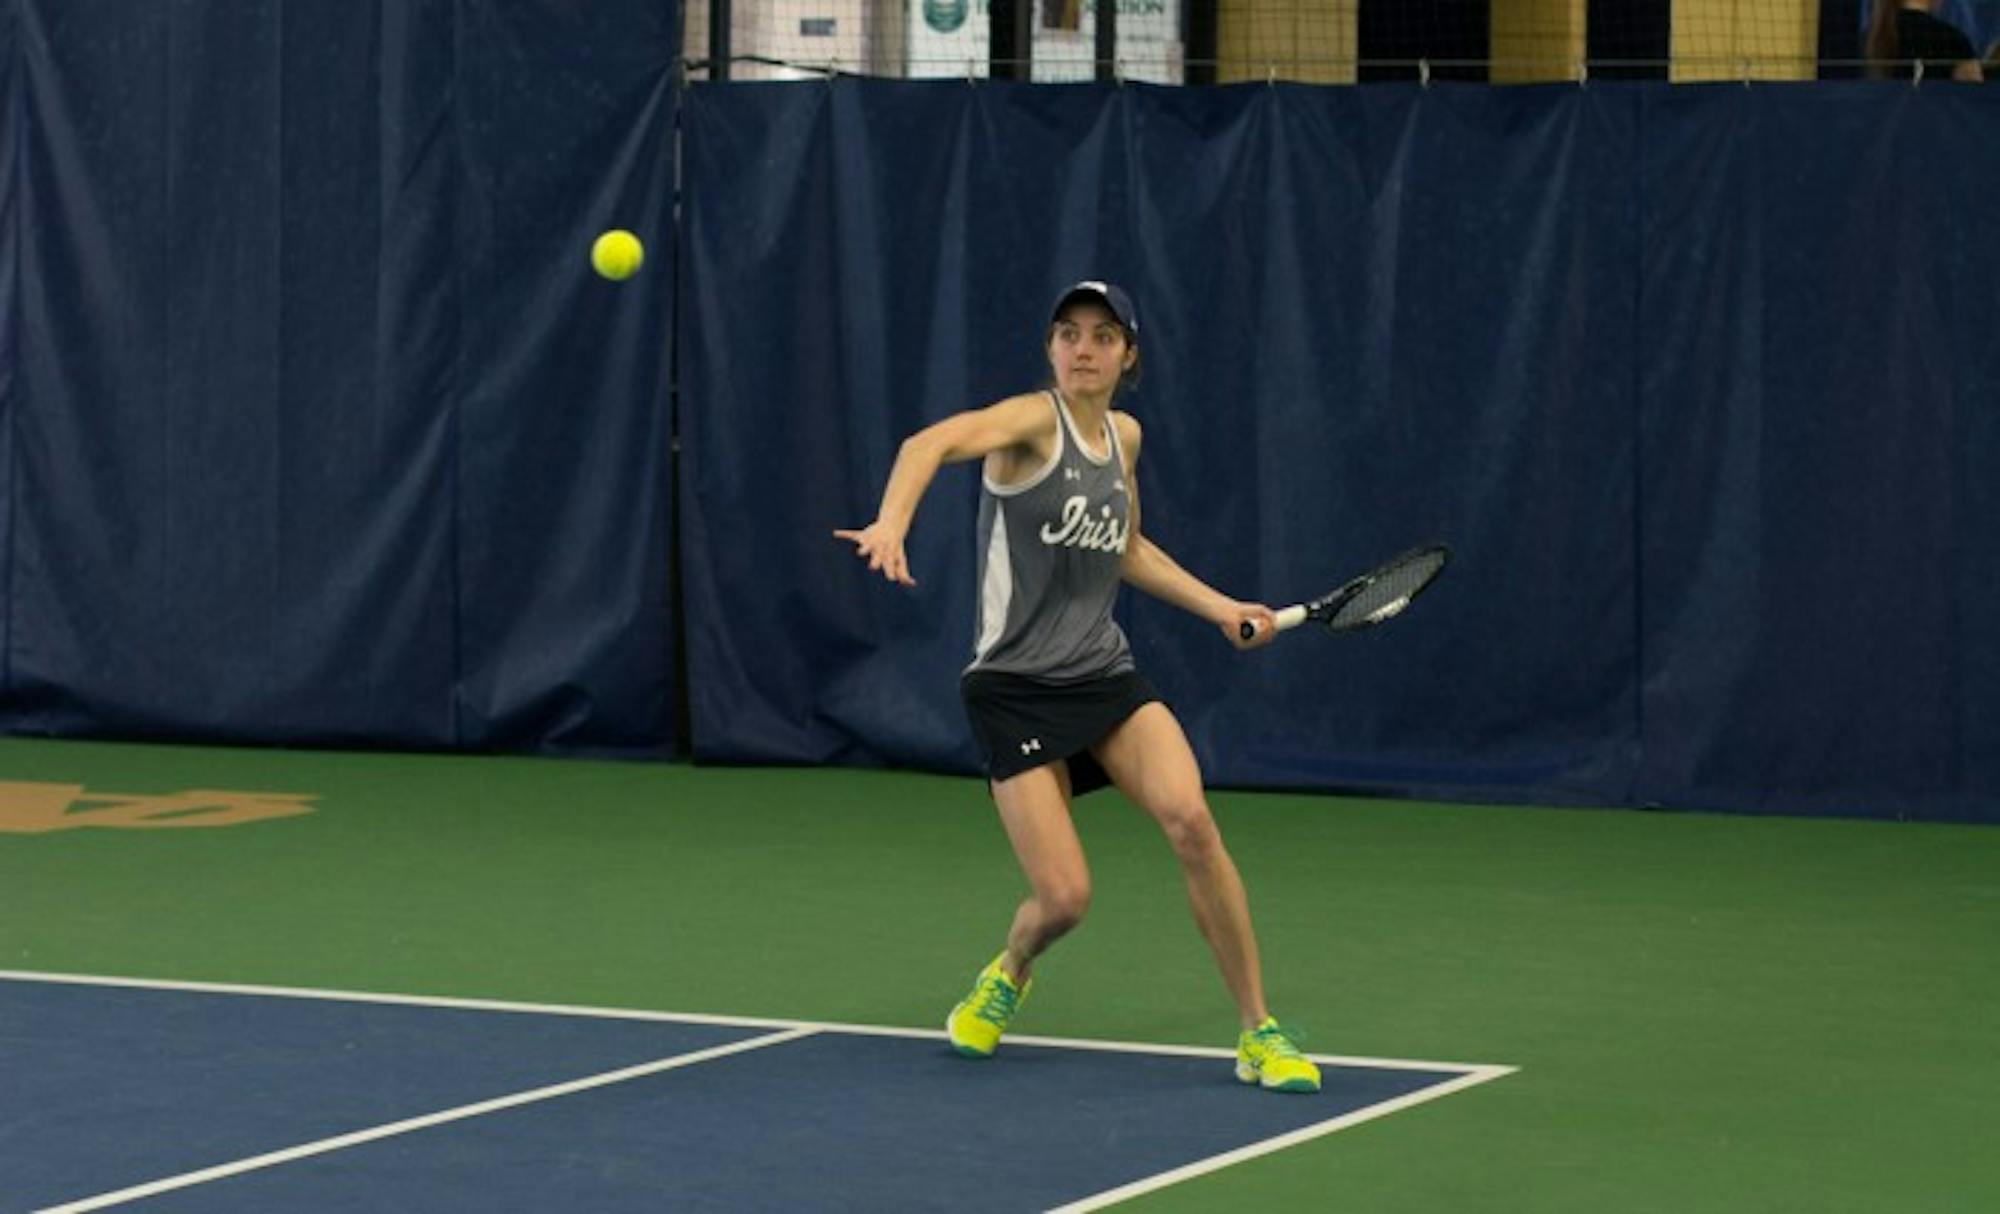 Junior Mary Closs returns a hit in her 6-1 singles victory against Indiana at Eck Tennis Pavilion on Feb. 20.